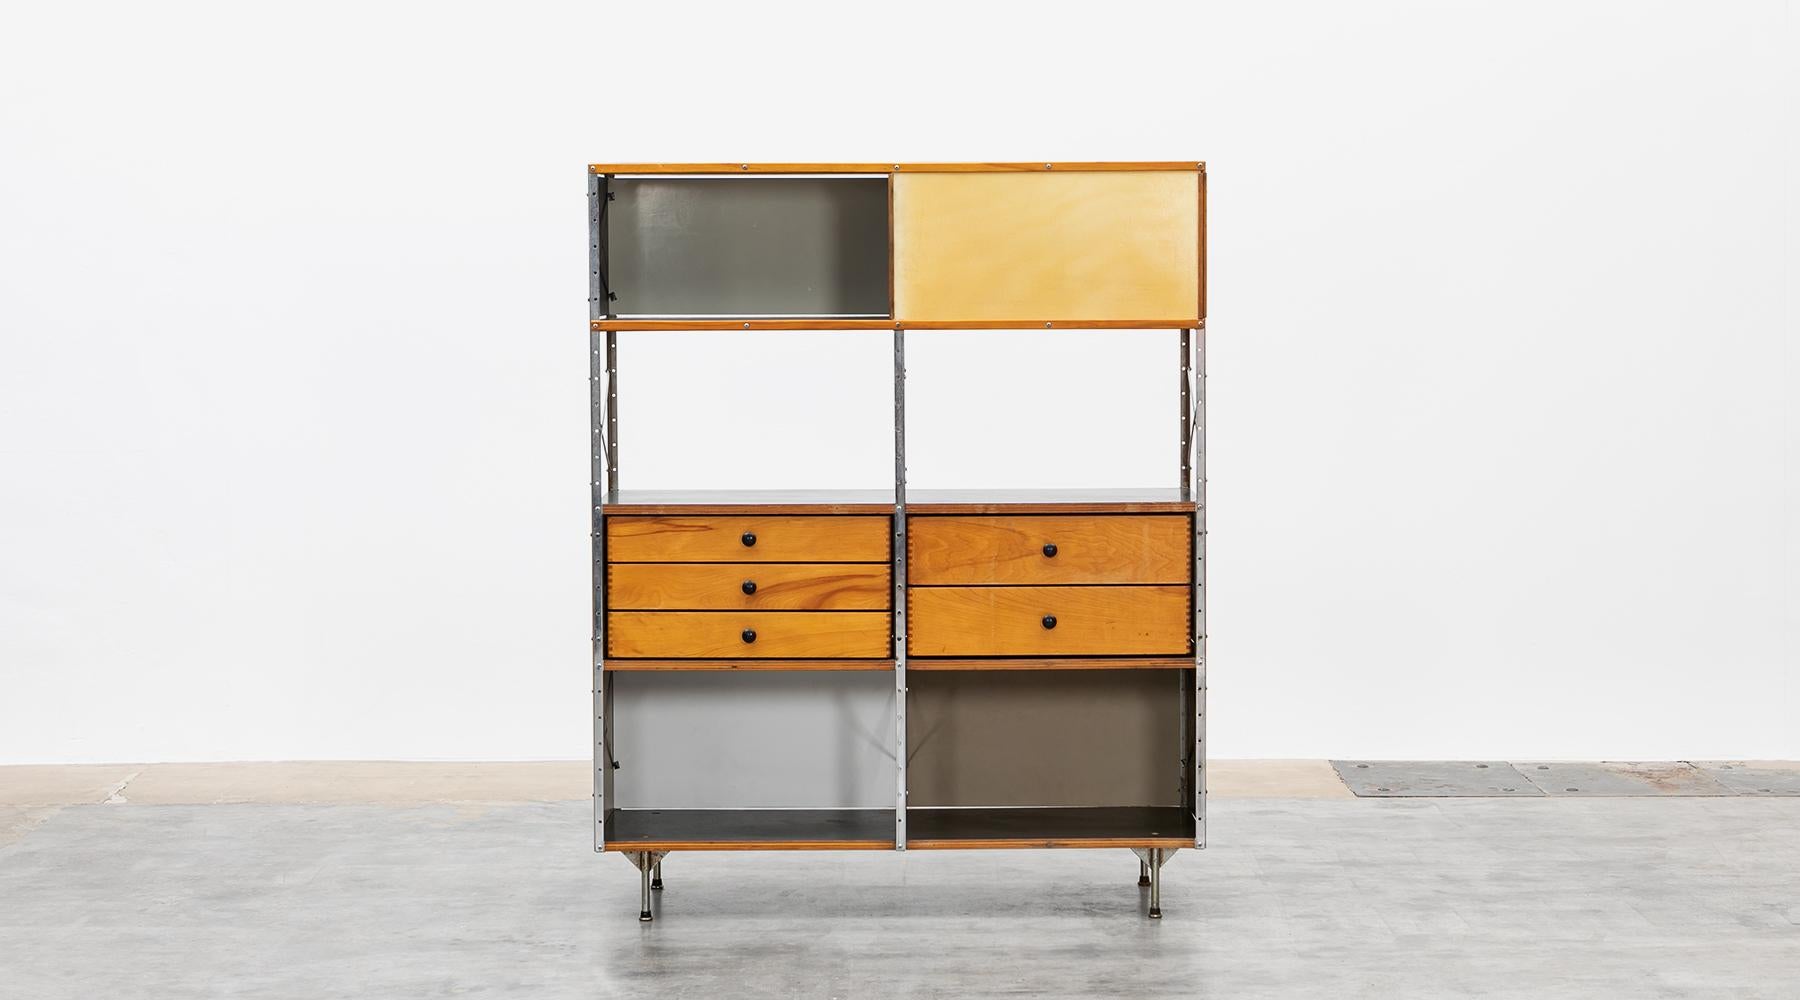 Charles and Ray Eames storage unit featuring five drawers in the middle area. Side and back panels feature a color combination of grey, beige and black. The shelf comes in good original condition with patina. Manufactured by Herman Miller.

Ray